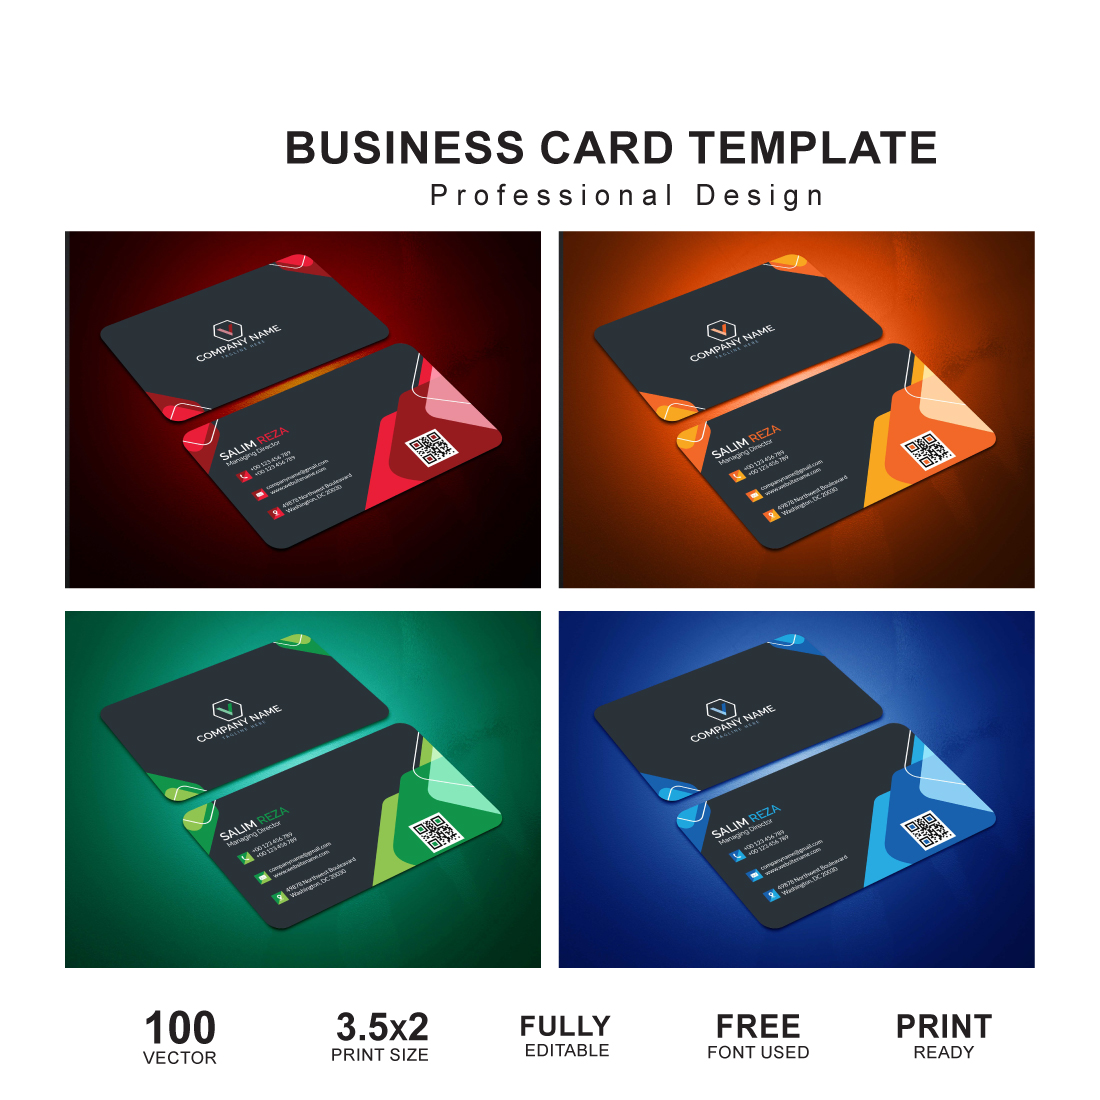 Business Card 4 Template cover image.